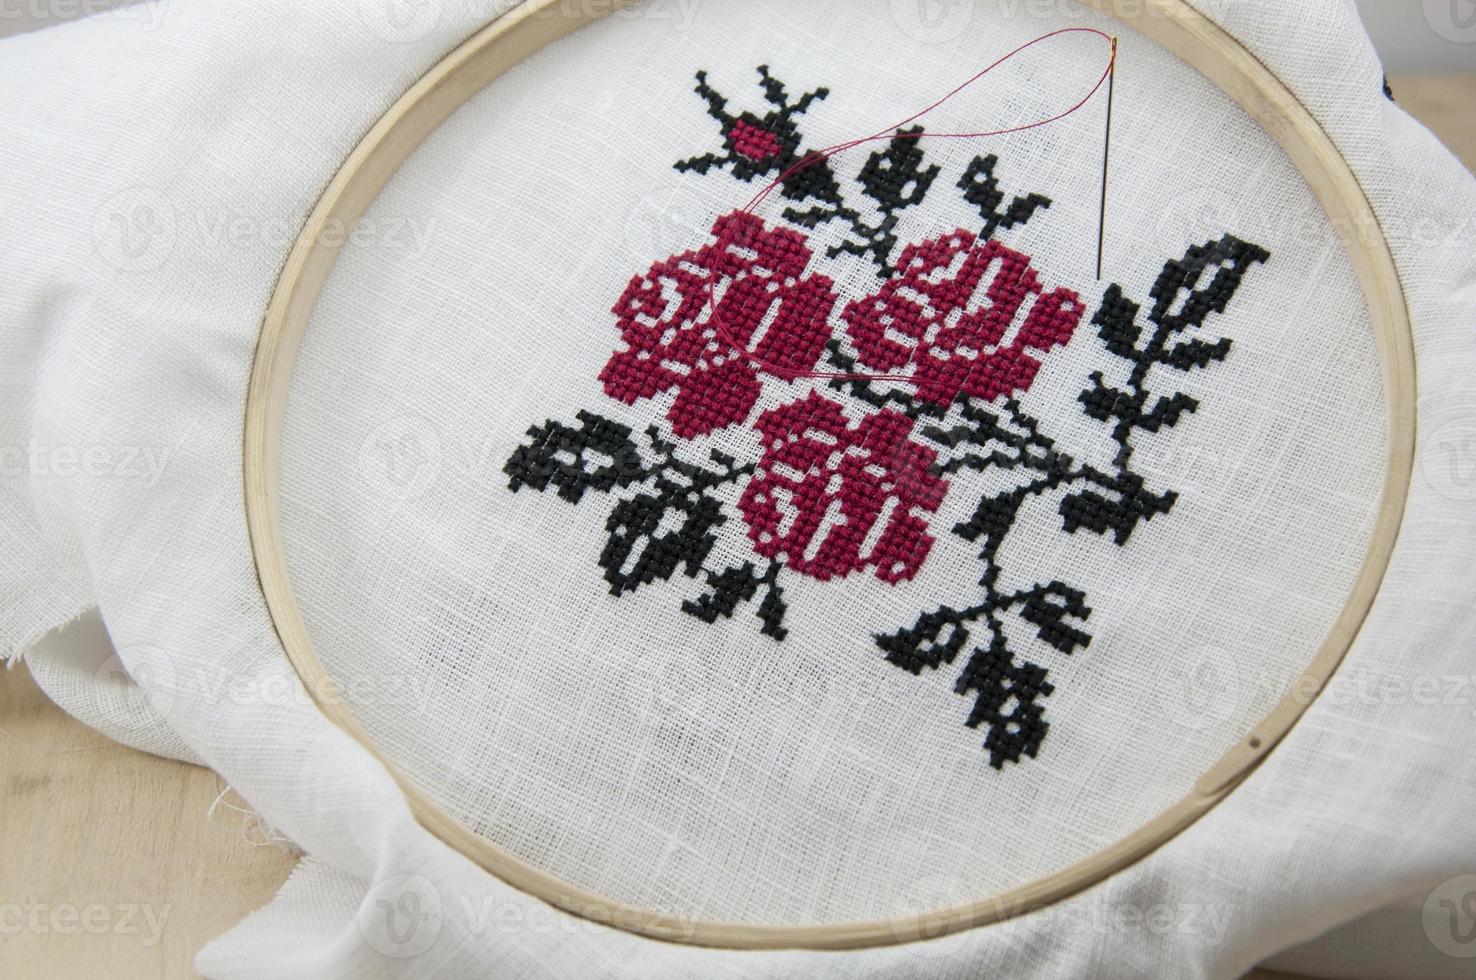 Embroidered pattern in the hoop photo